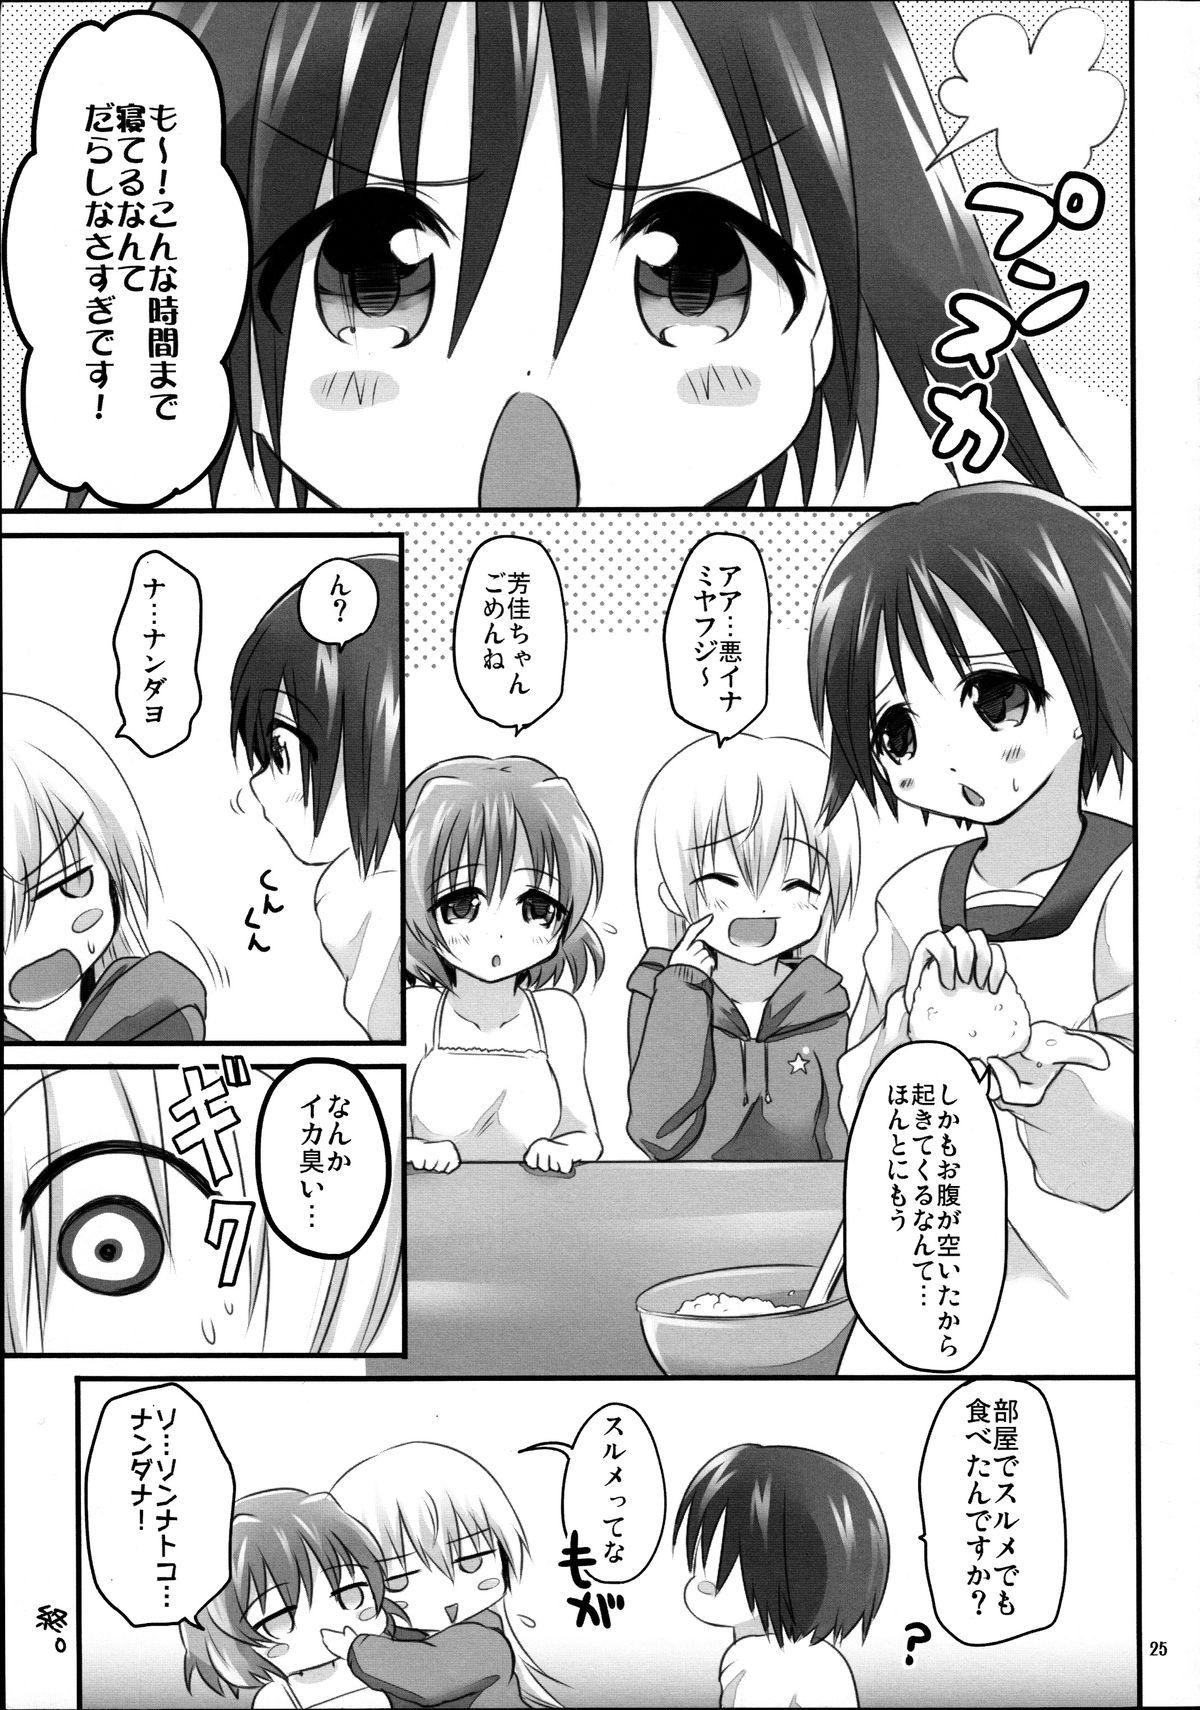 Groupsex Witch no Kyuujitsu - Strike witches Striptease - Page 25